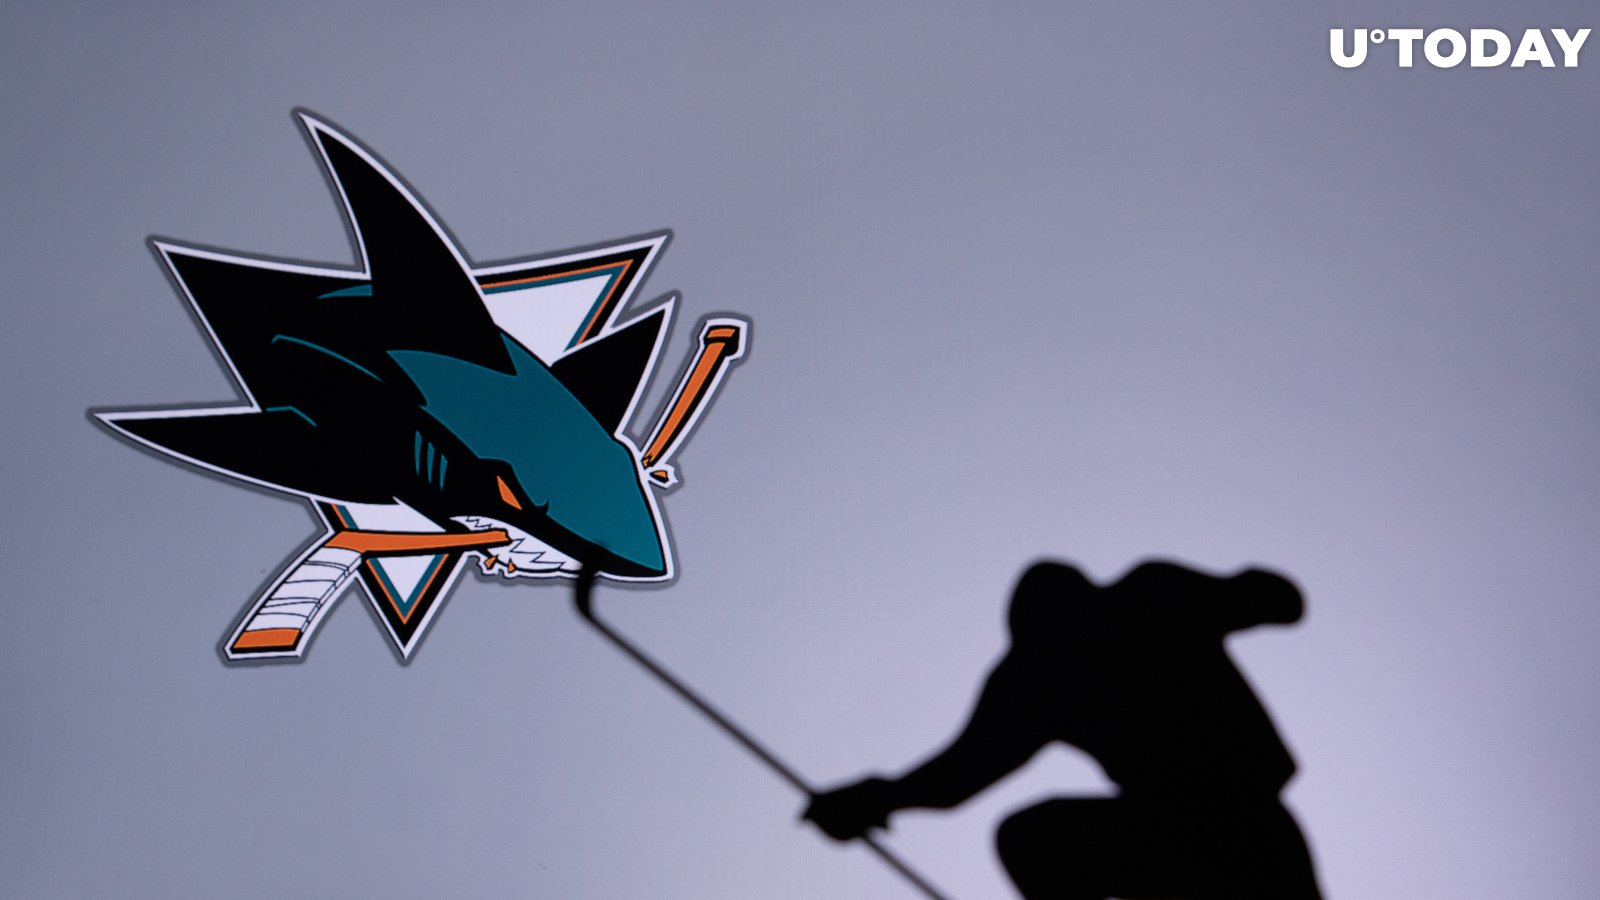 NHL's Sharks to Start Accepting Dogecoin, Bitcoin, Ethereum, and Other Coins